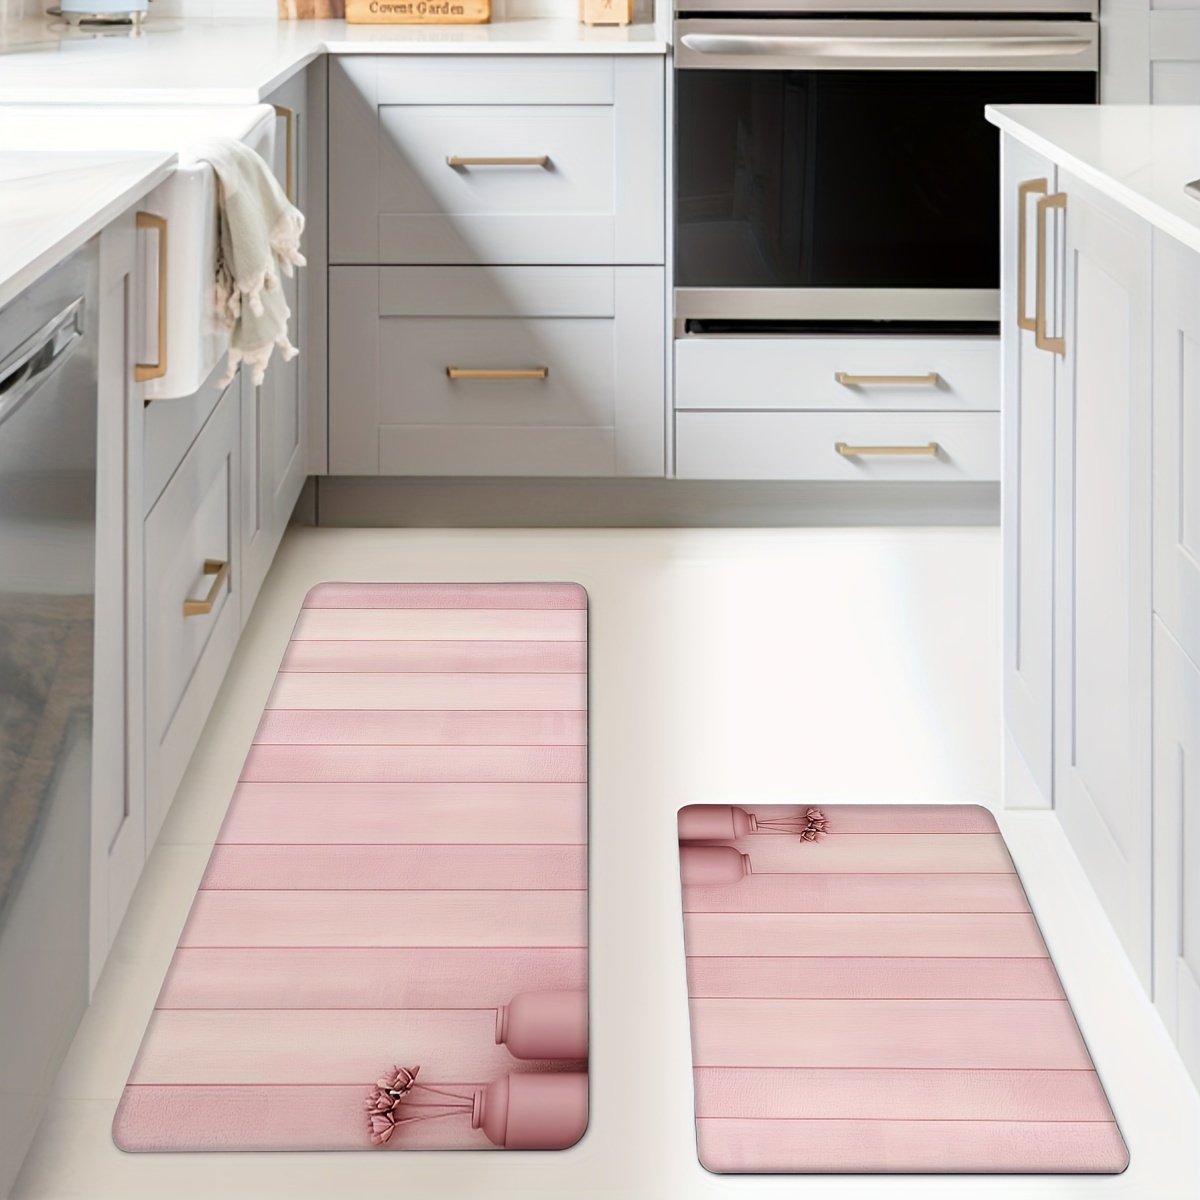 

1pc/2pcs, Pink Kitchen Mats, Non-slip And Durable Bathroom Pads For Floor, Comfortable Standing Runner Rugs, Carpets For Kitchen, Home, Office, Laundry Room, Bathroom, Spring Decor